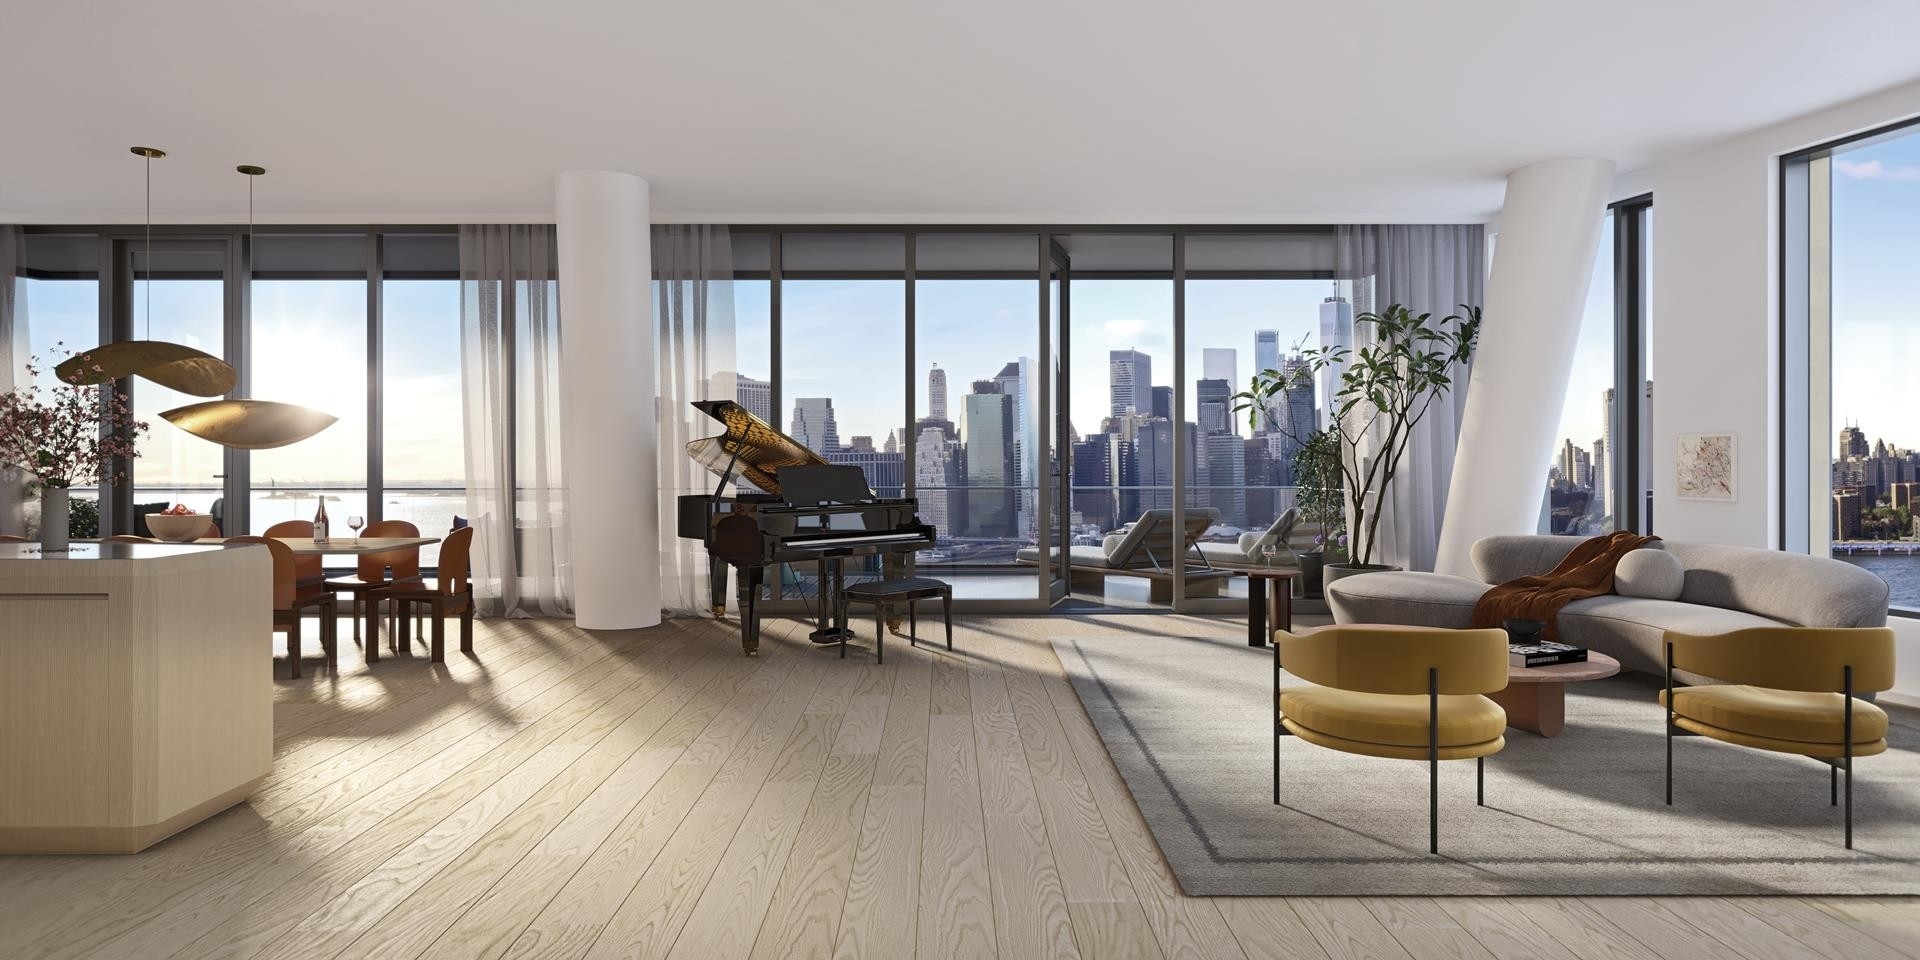 3. Condominiums for Sale at Olympia Dumbo, 30 FRONT ST, 29B Brooklyn, New York 11201